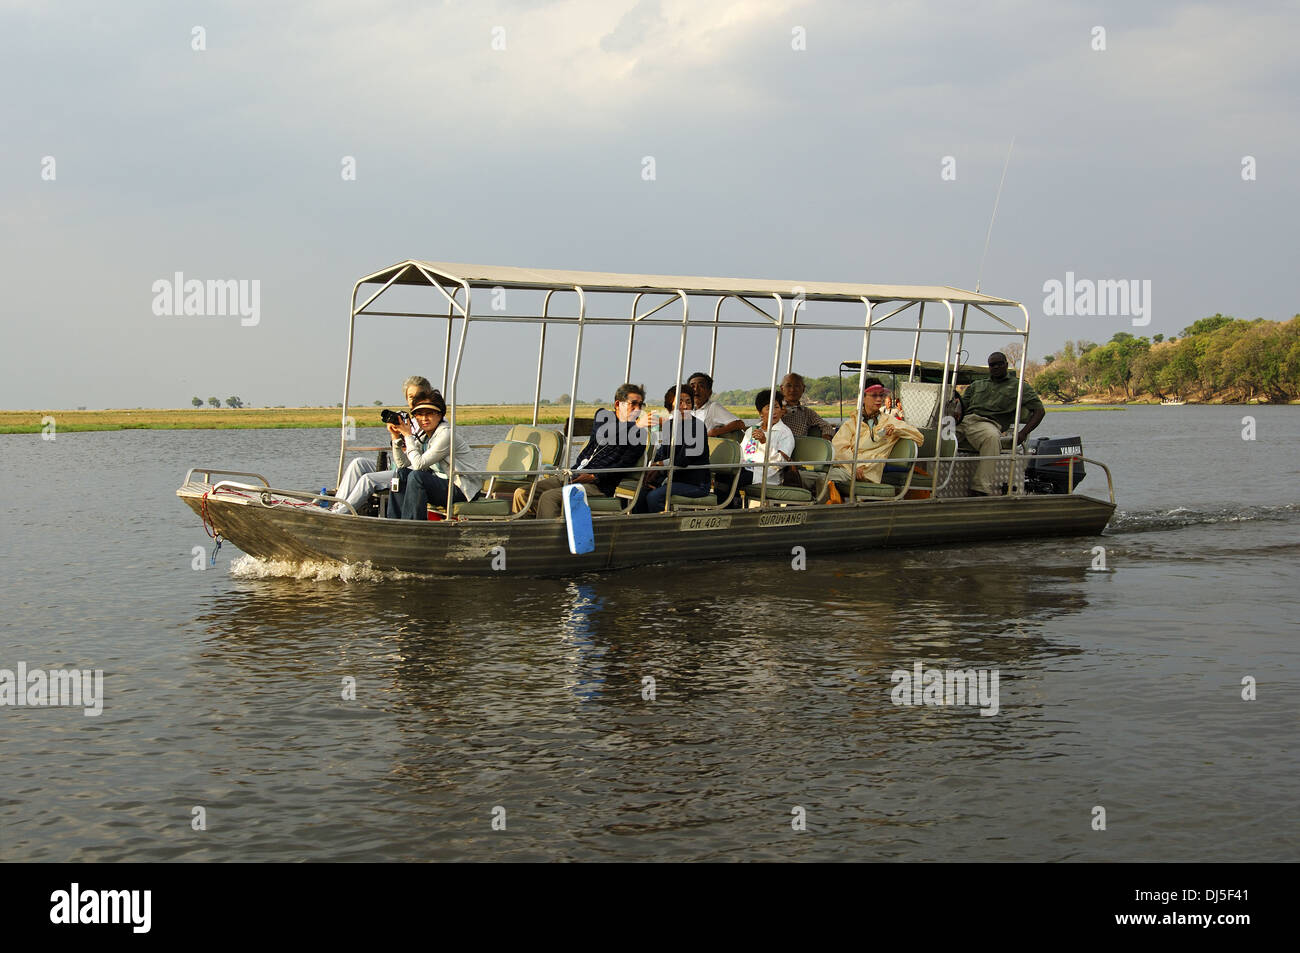 Japanese tourists on the Chobe River Stock Photo